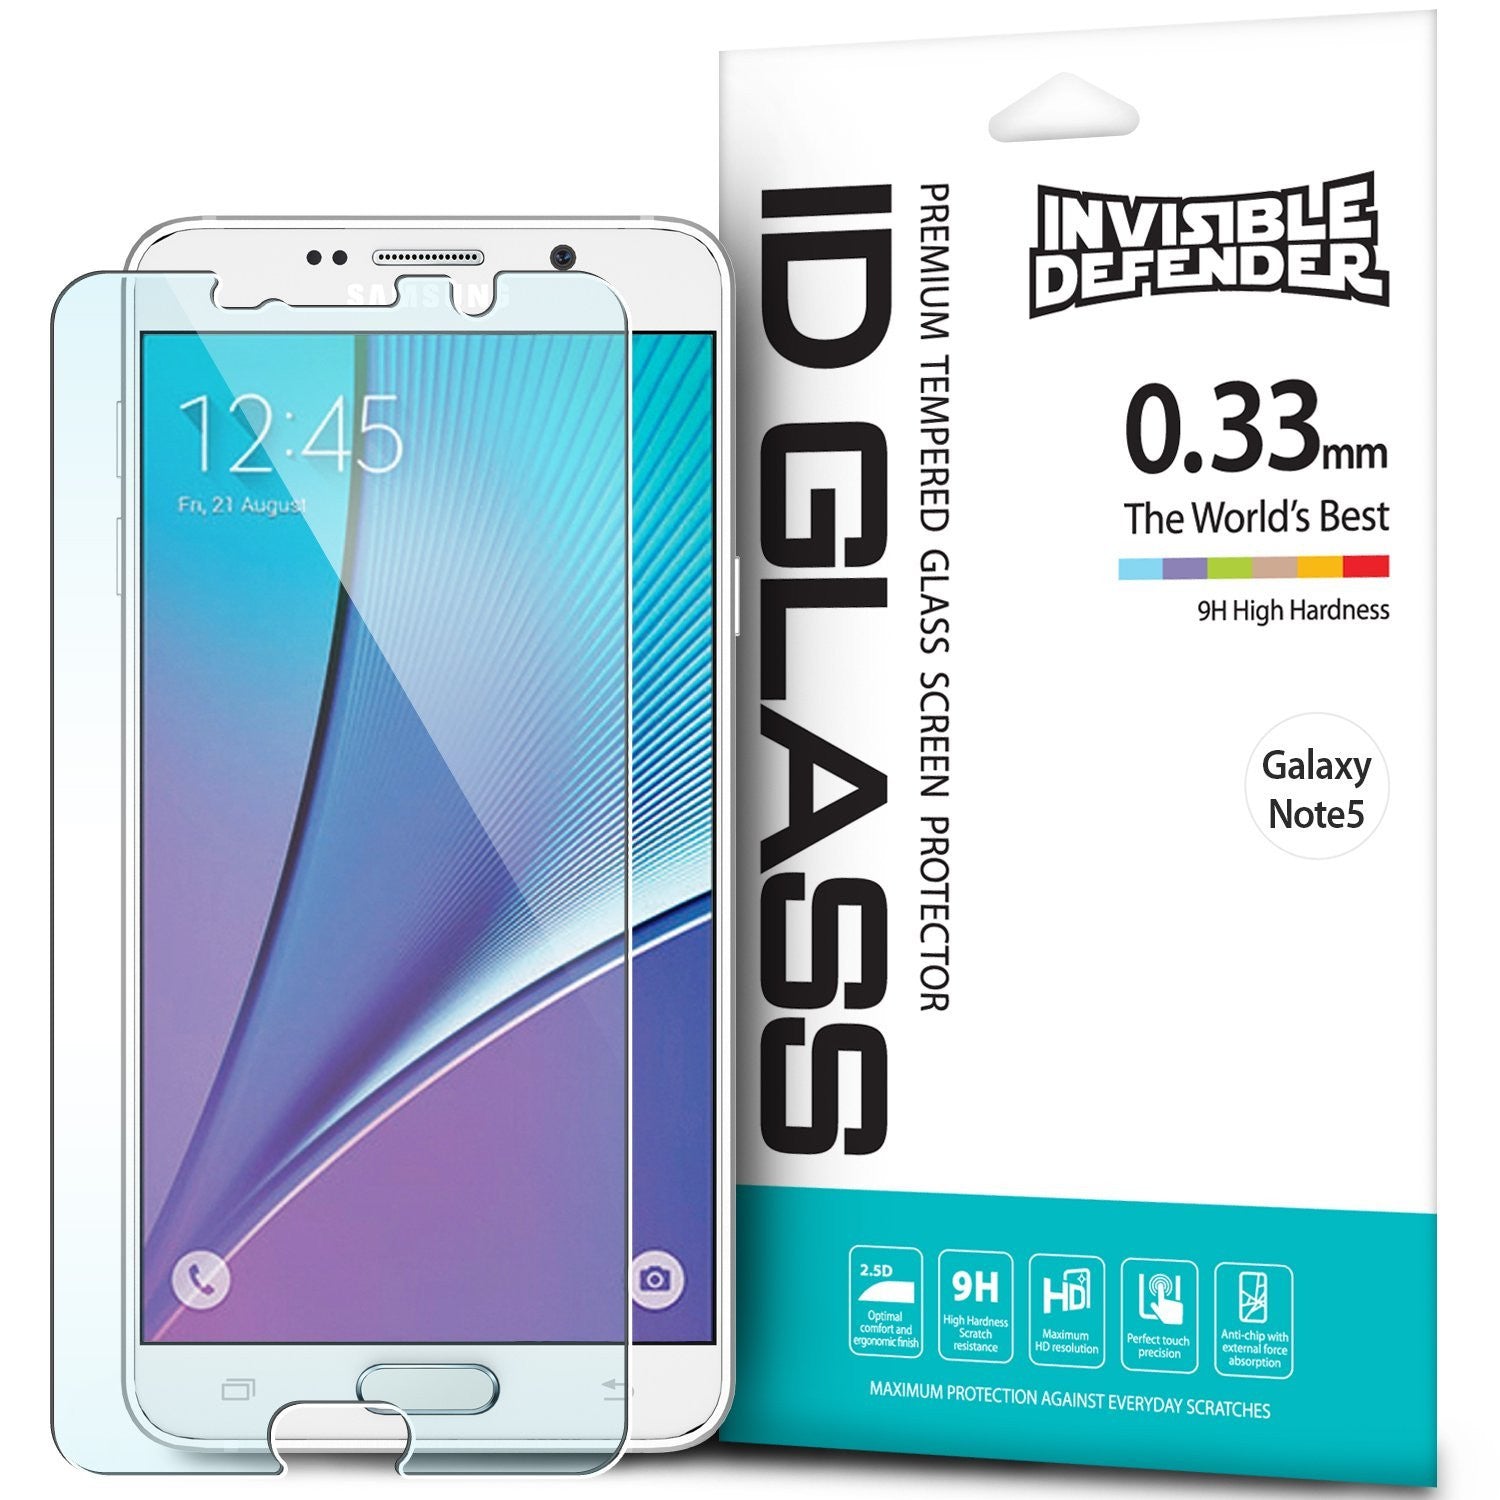 galaxy note 5 ringke invisible defender tempered glass screen protector